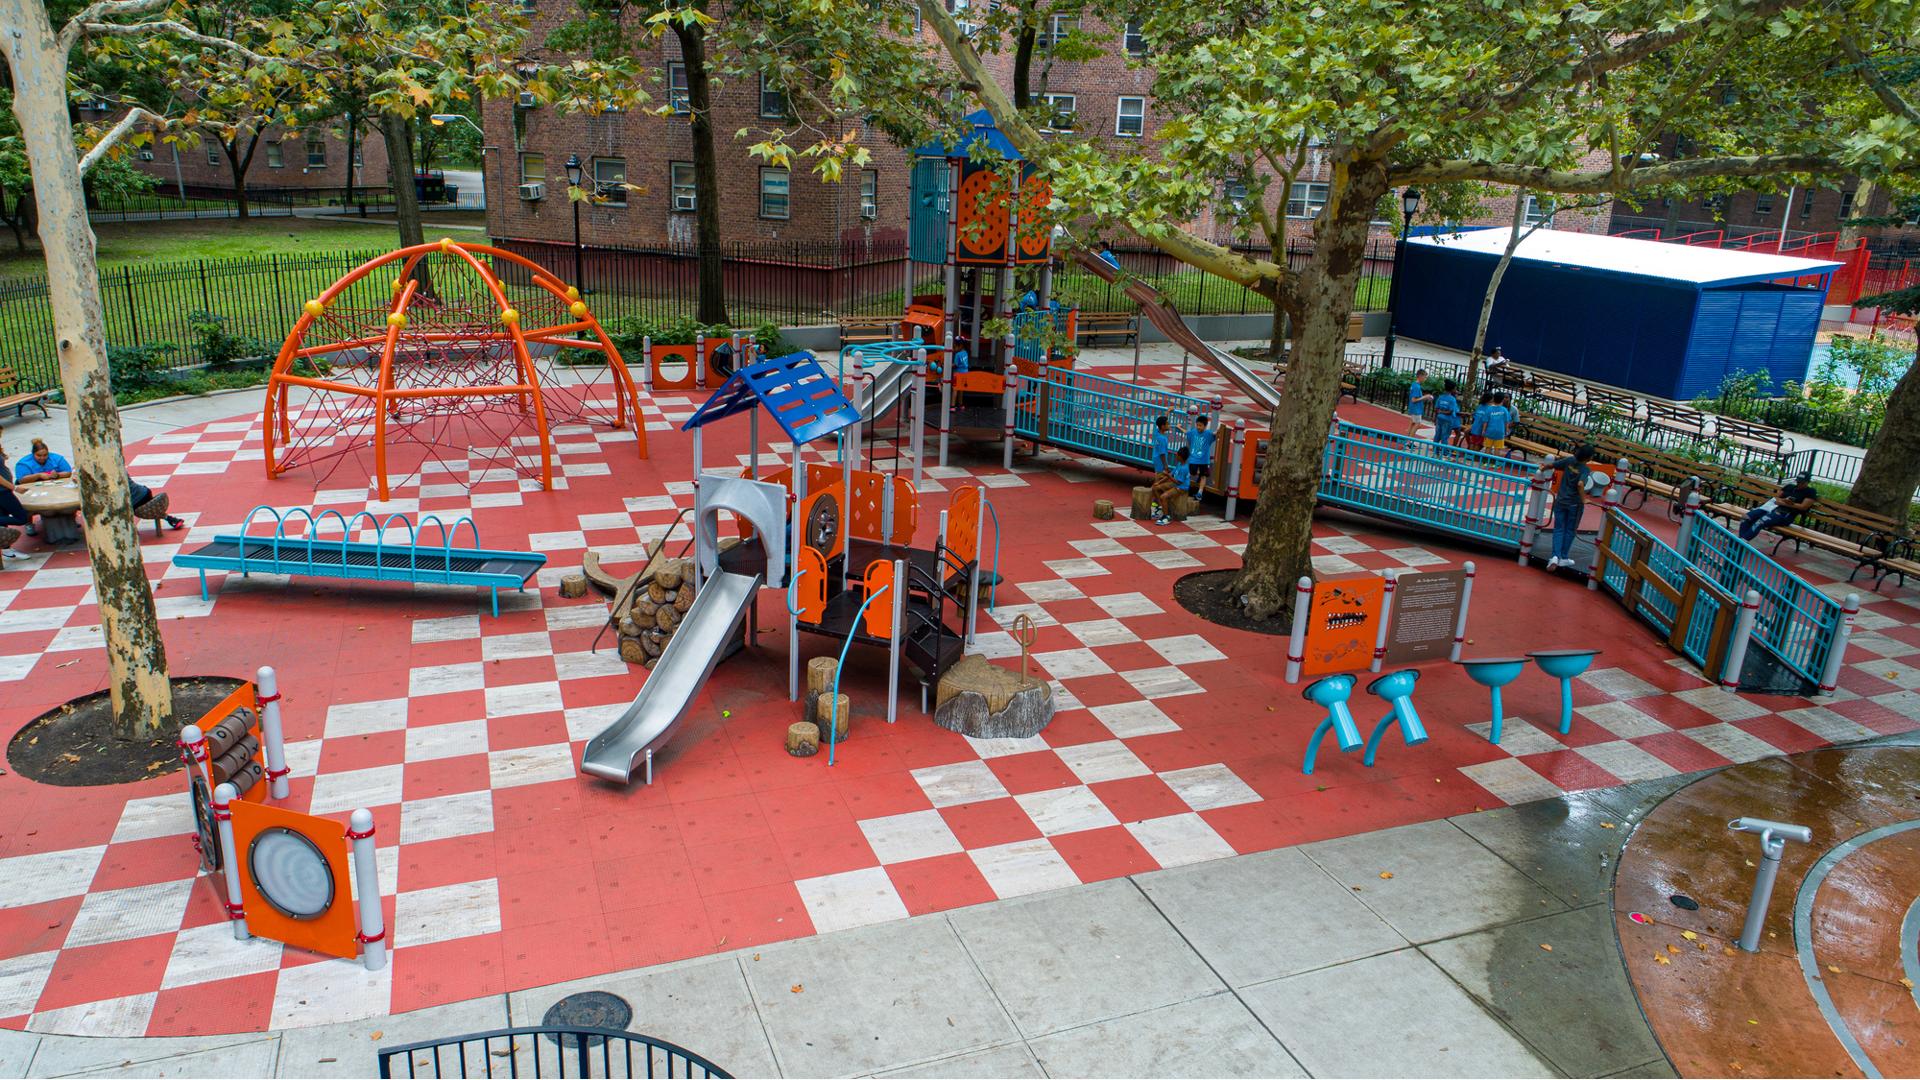 Elevated view of a city playground with a large inclusive play structure and a smaller play structure for younger children in the foreground. Grey and orange square safety surfacing create a checker pattern on the ground.